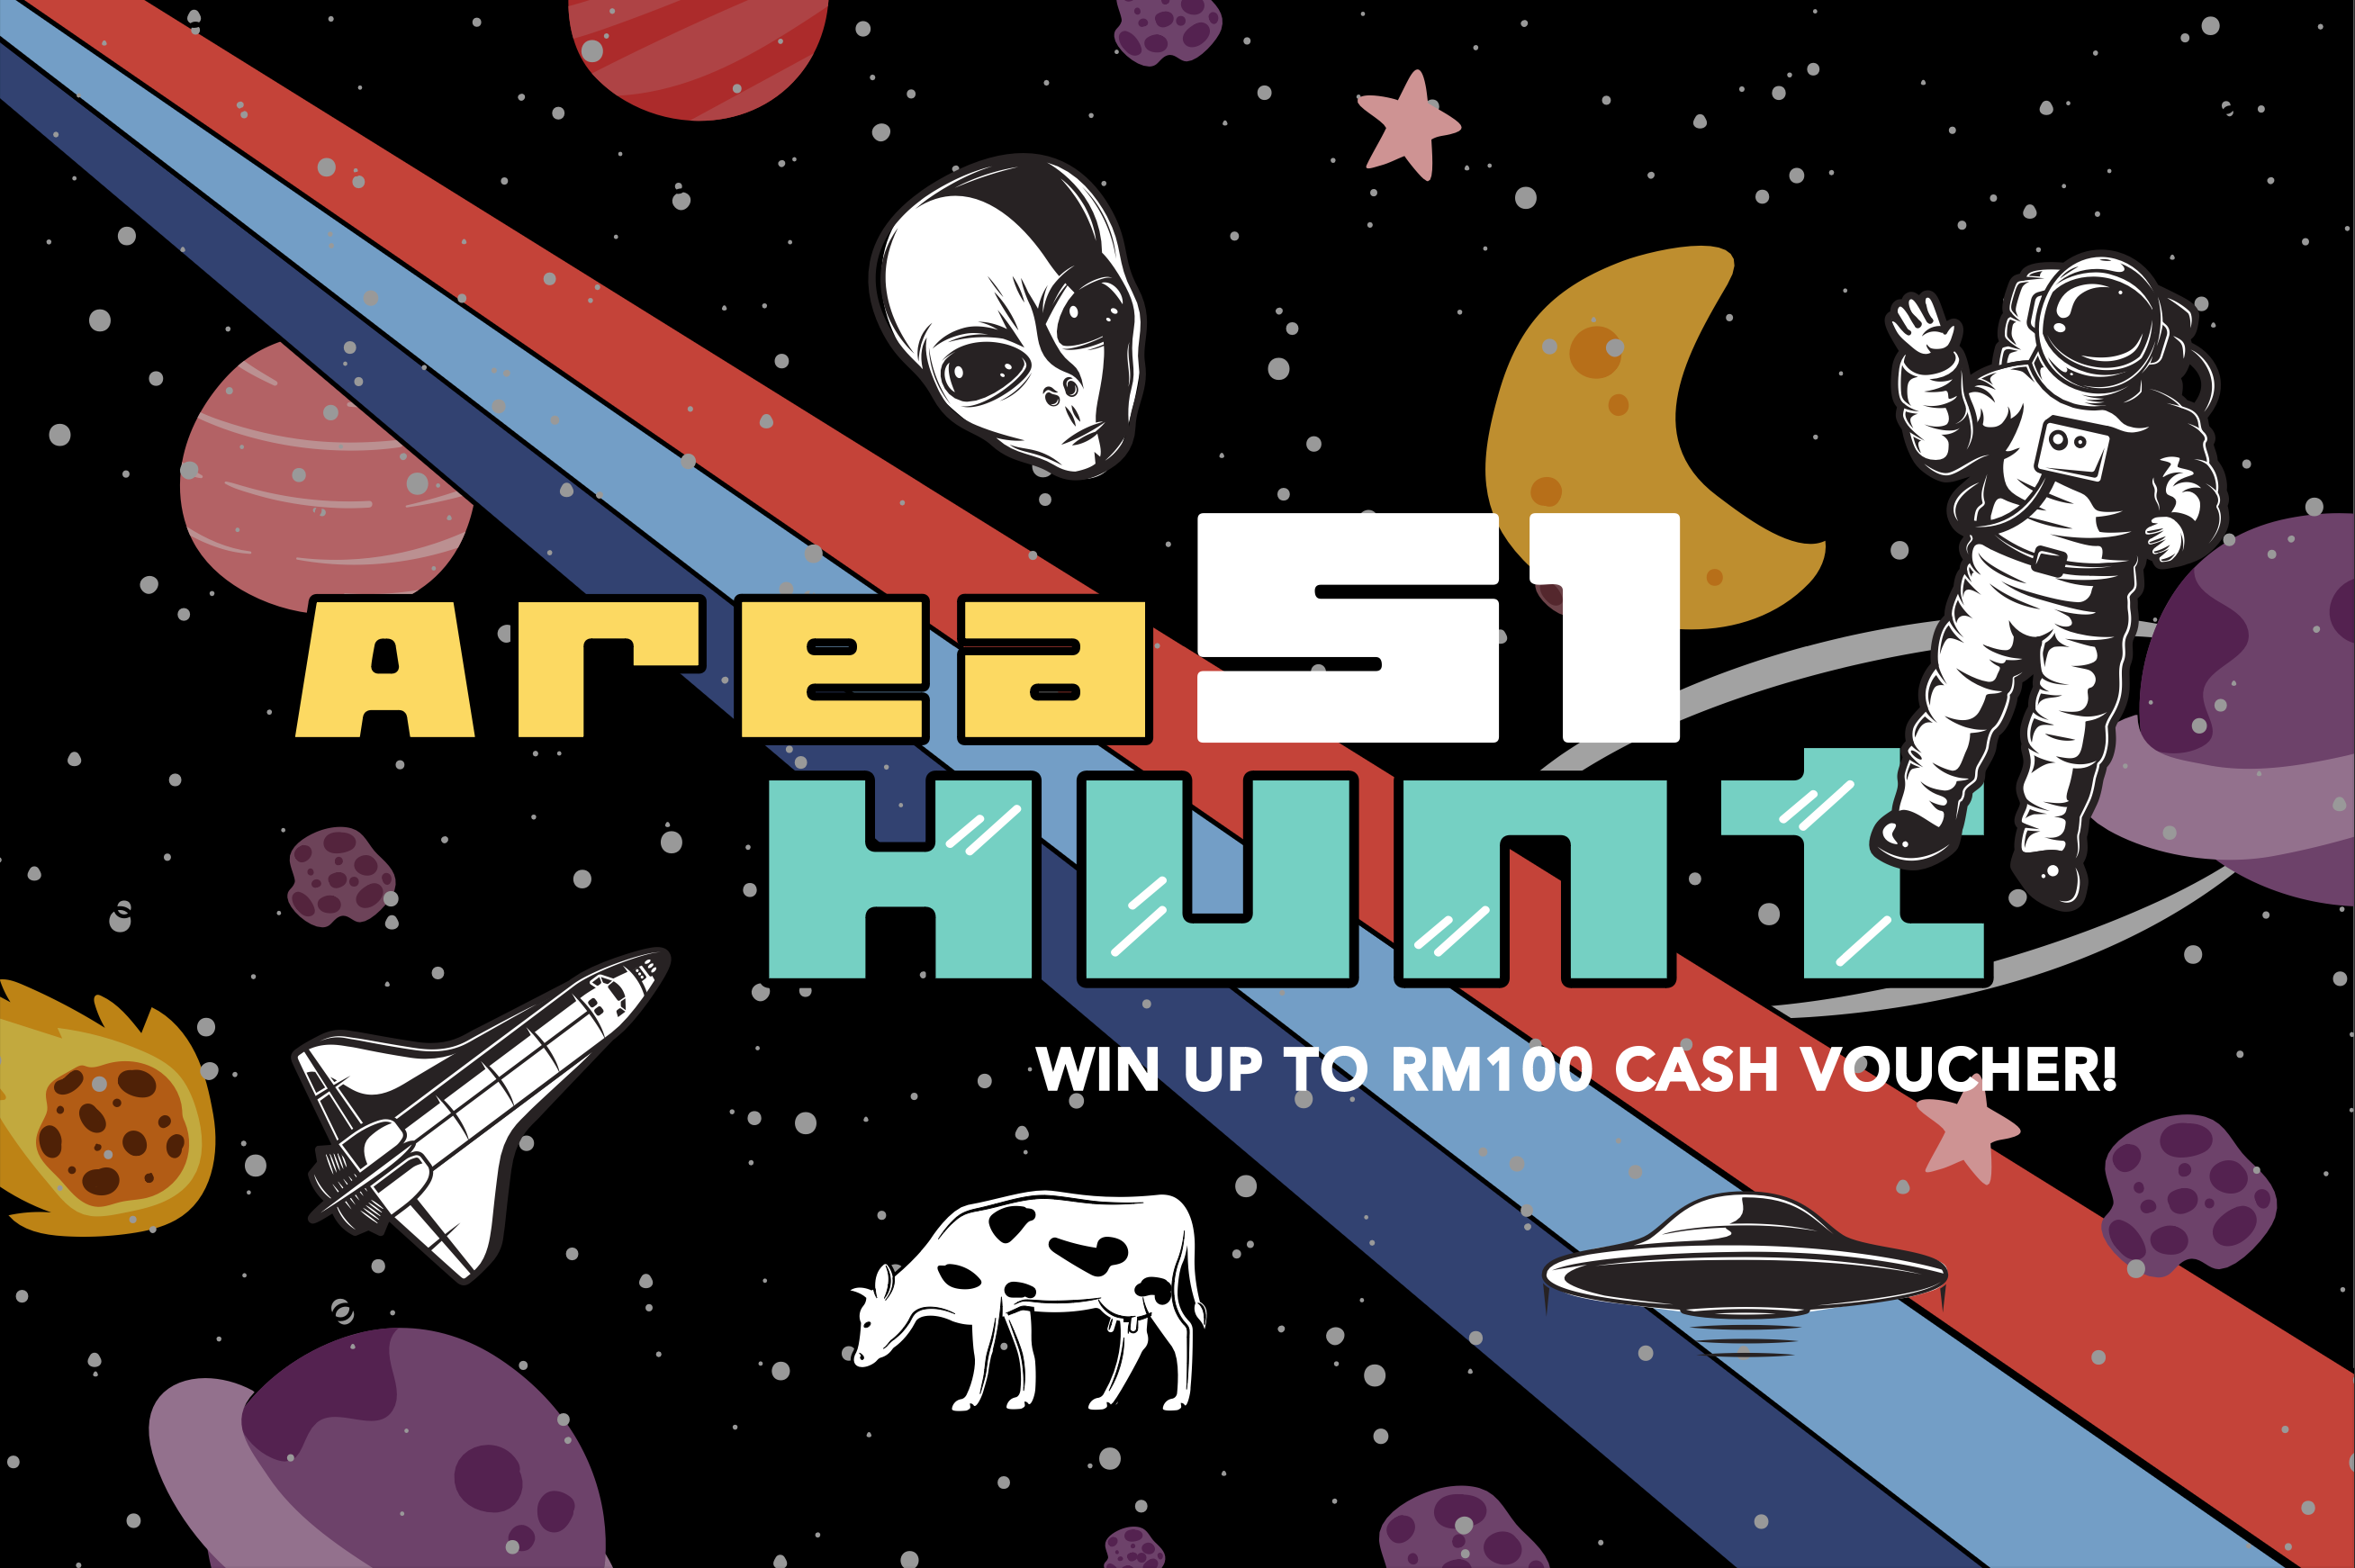 23 - HUNT FOR THE EXCLUSIVE PROMO CODE IN THE AREA 51 HUNT!